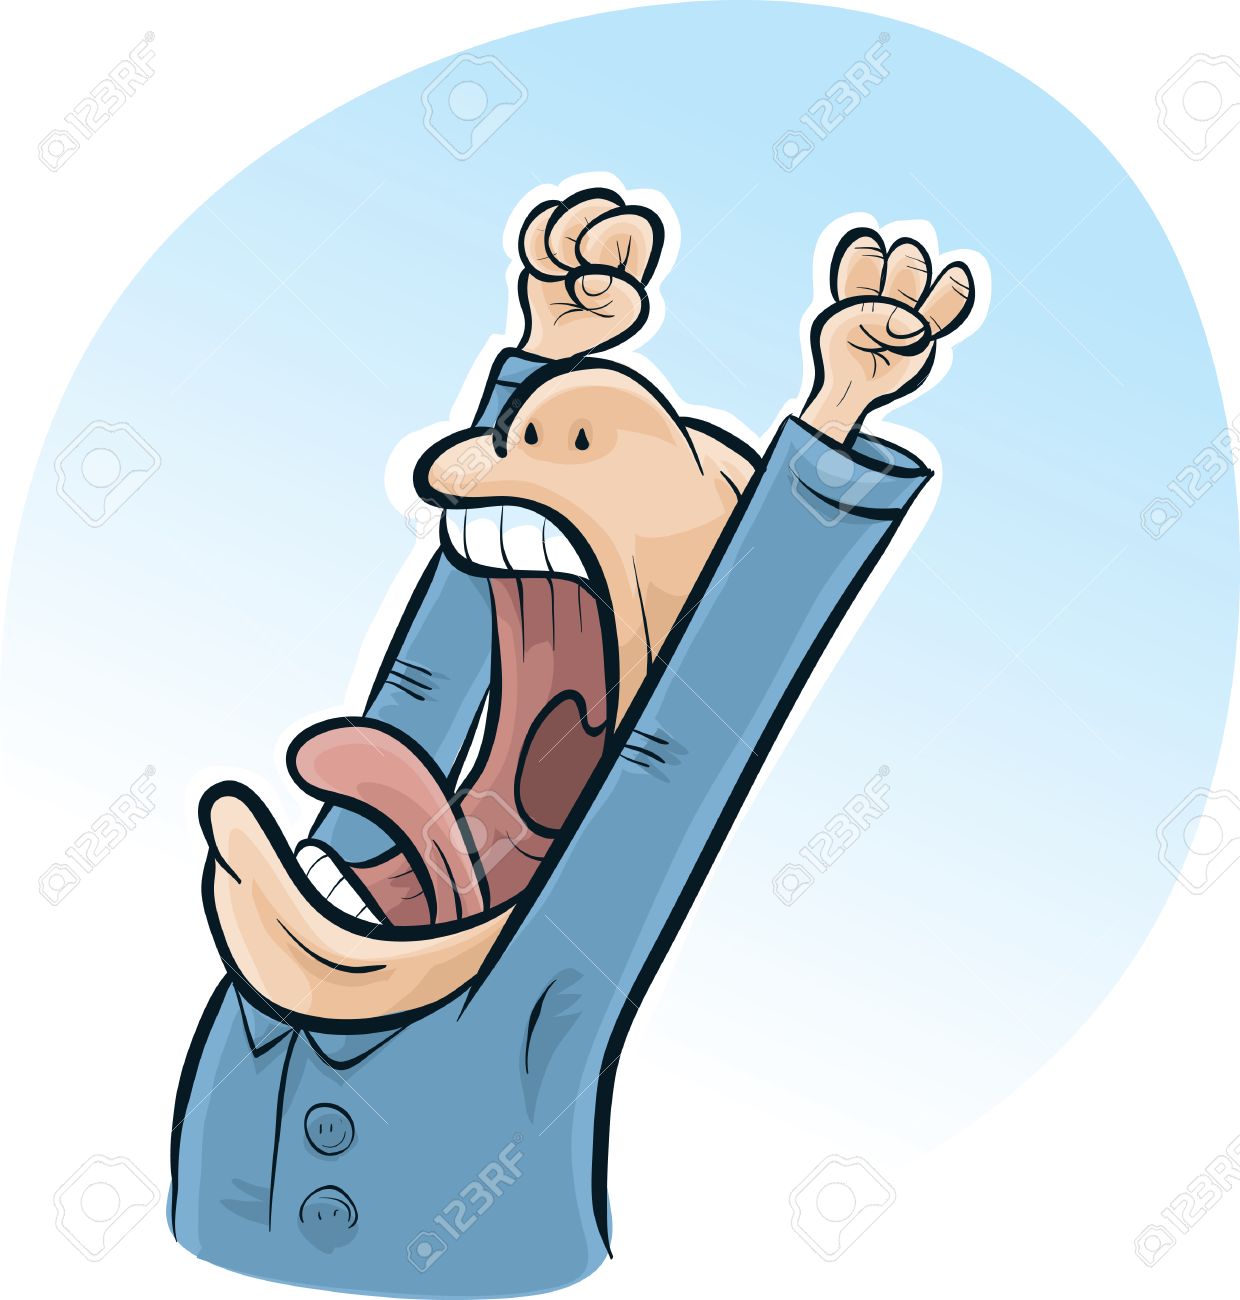 29717368-A-cartoon-man-has-a-big-yawn-in-the-morning-as-he-wakes-up--Stock-Vector.jpg